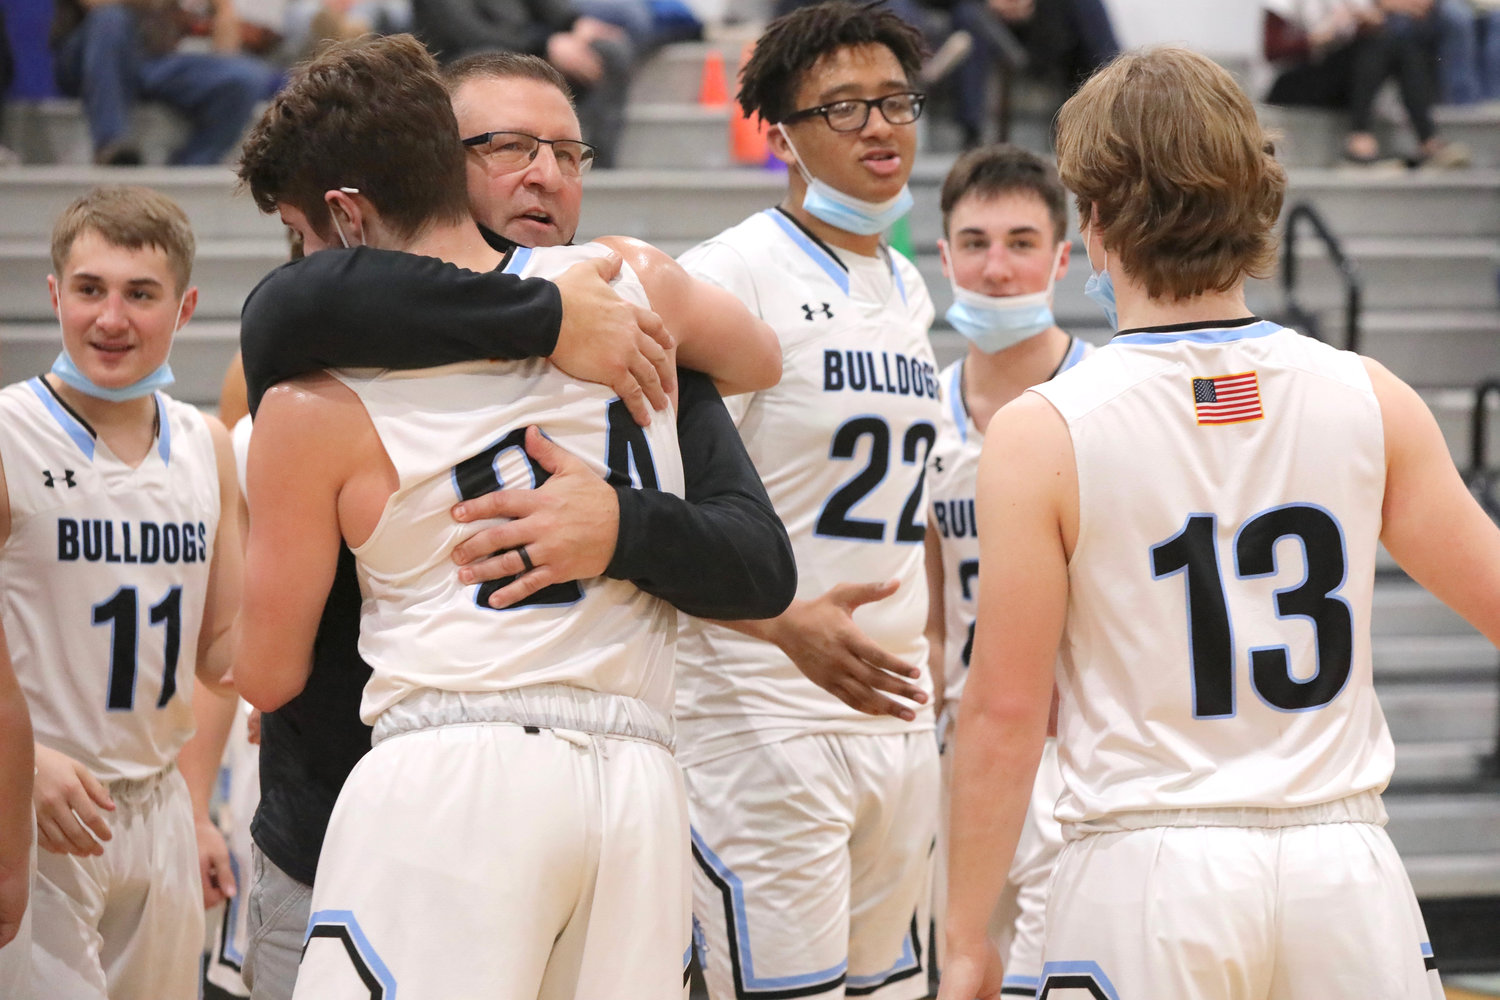 Then, the rite of passage.
Sullivan West Coach John Meyer hugs each of the seniors at the end of the Bulldogs last game on their home floor. Pictured here he is clasping Dylan Sager in one of the special moments after the win over the Bears.